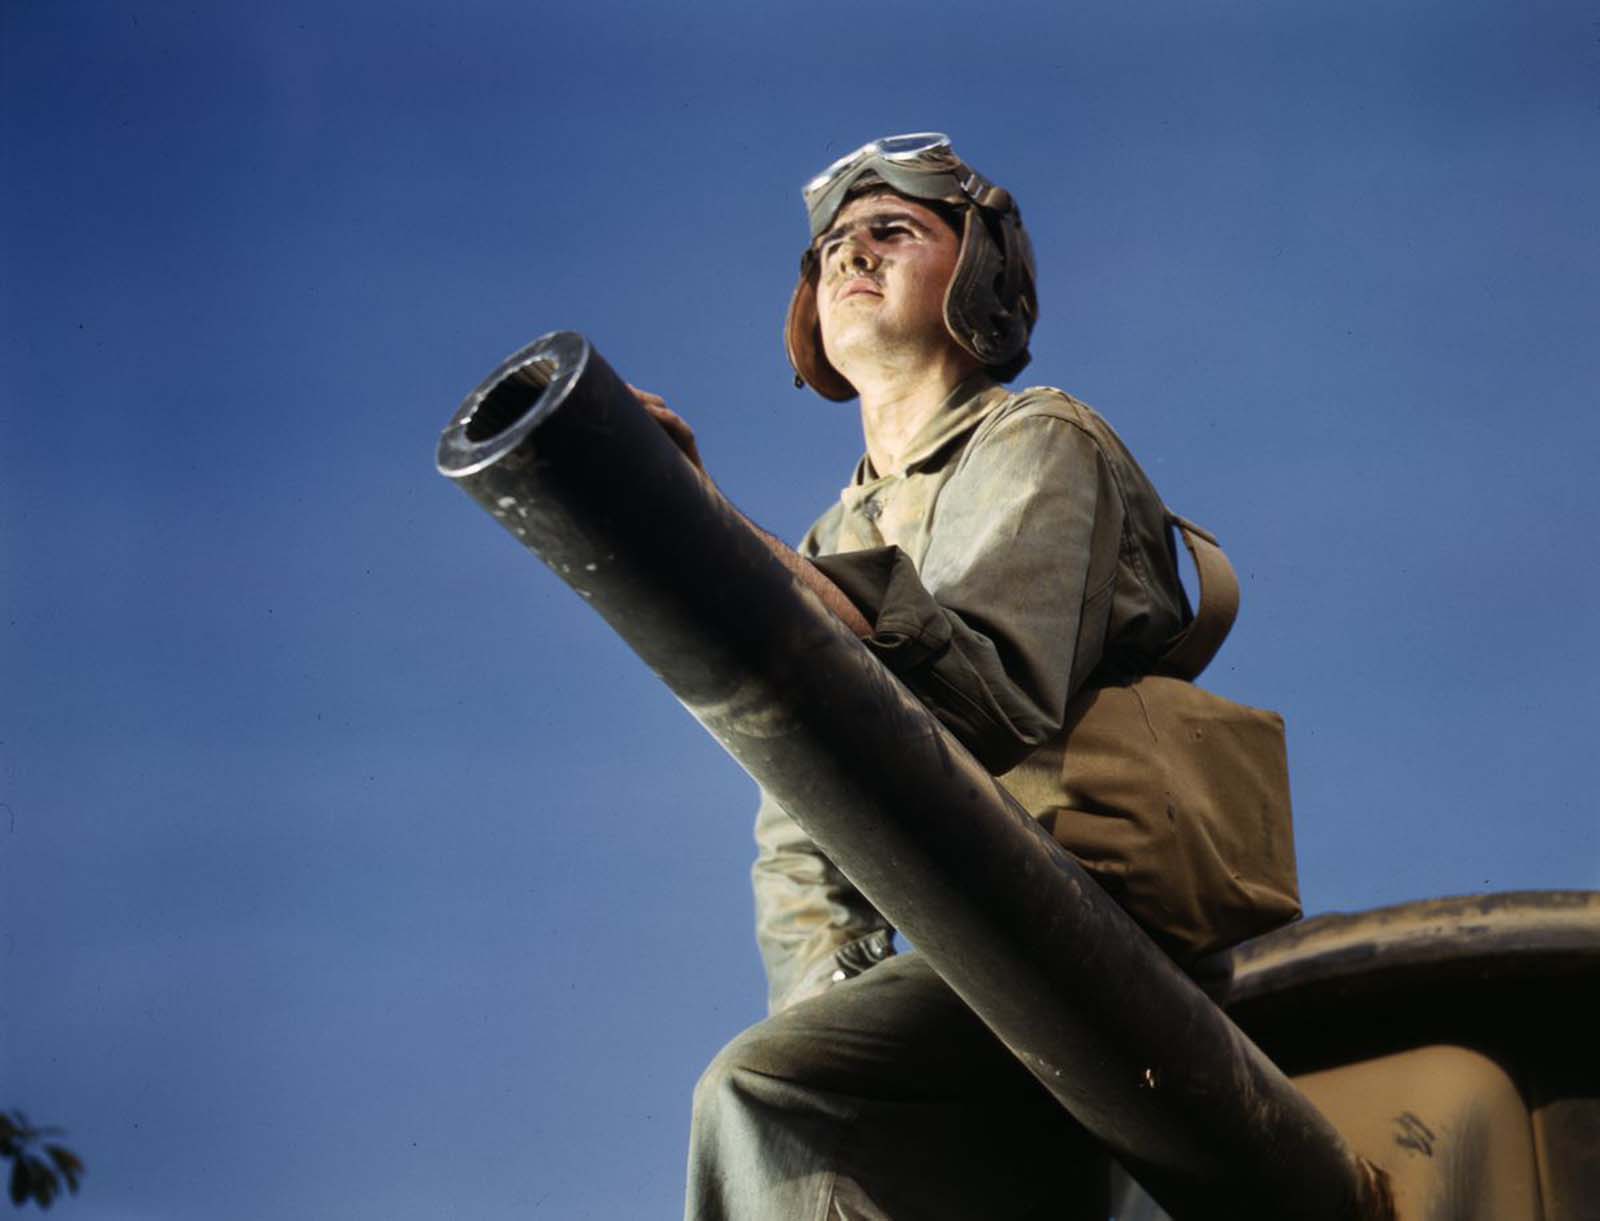 Stunning Color Photos of WWII Tank Crews of U.S. in Training at Fort Knox